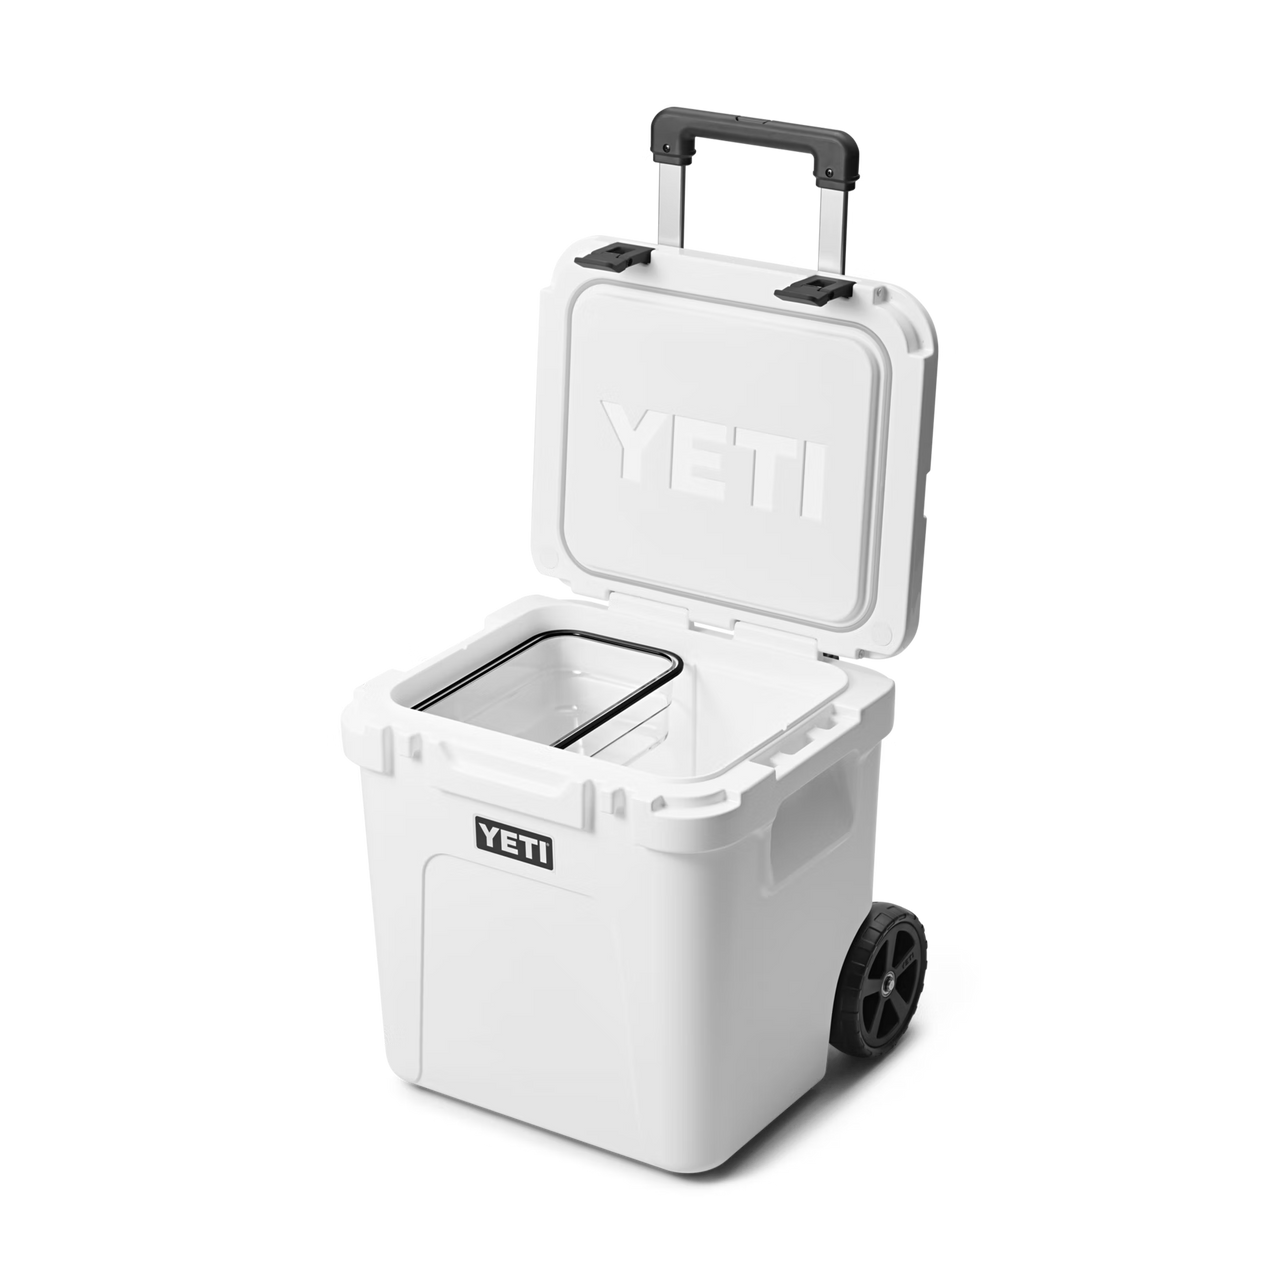  YETI Roadie 48 Wheeled Cooler with Retractable